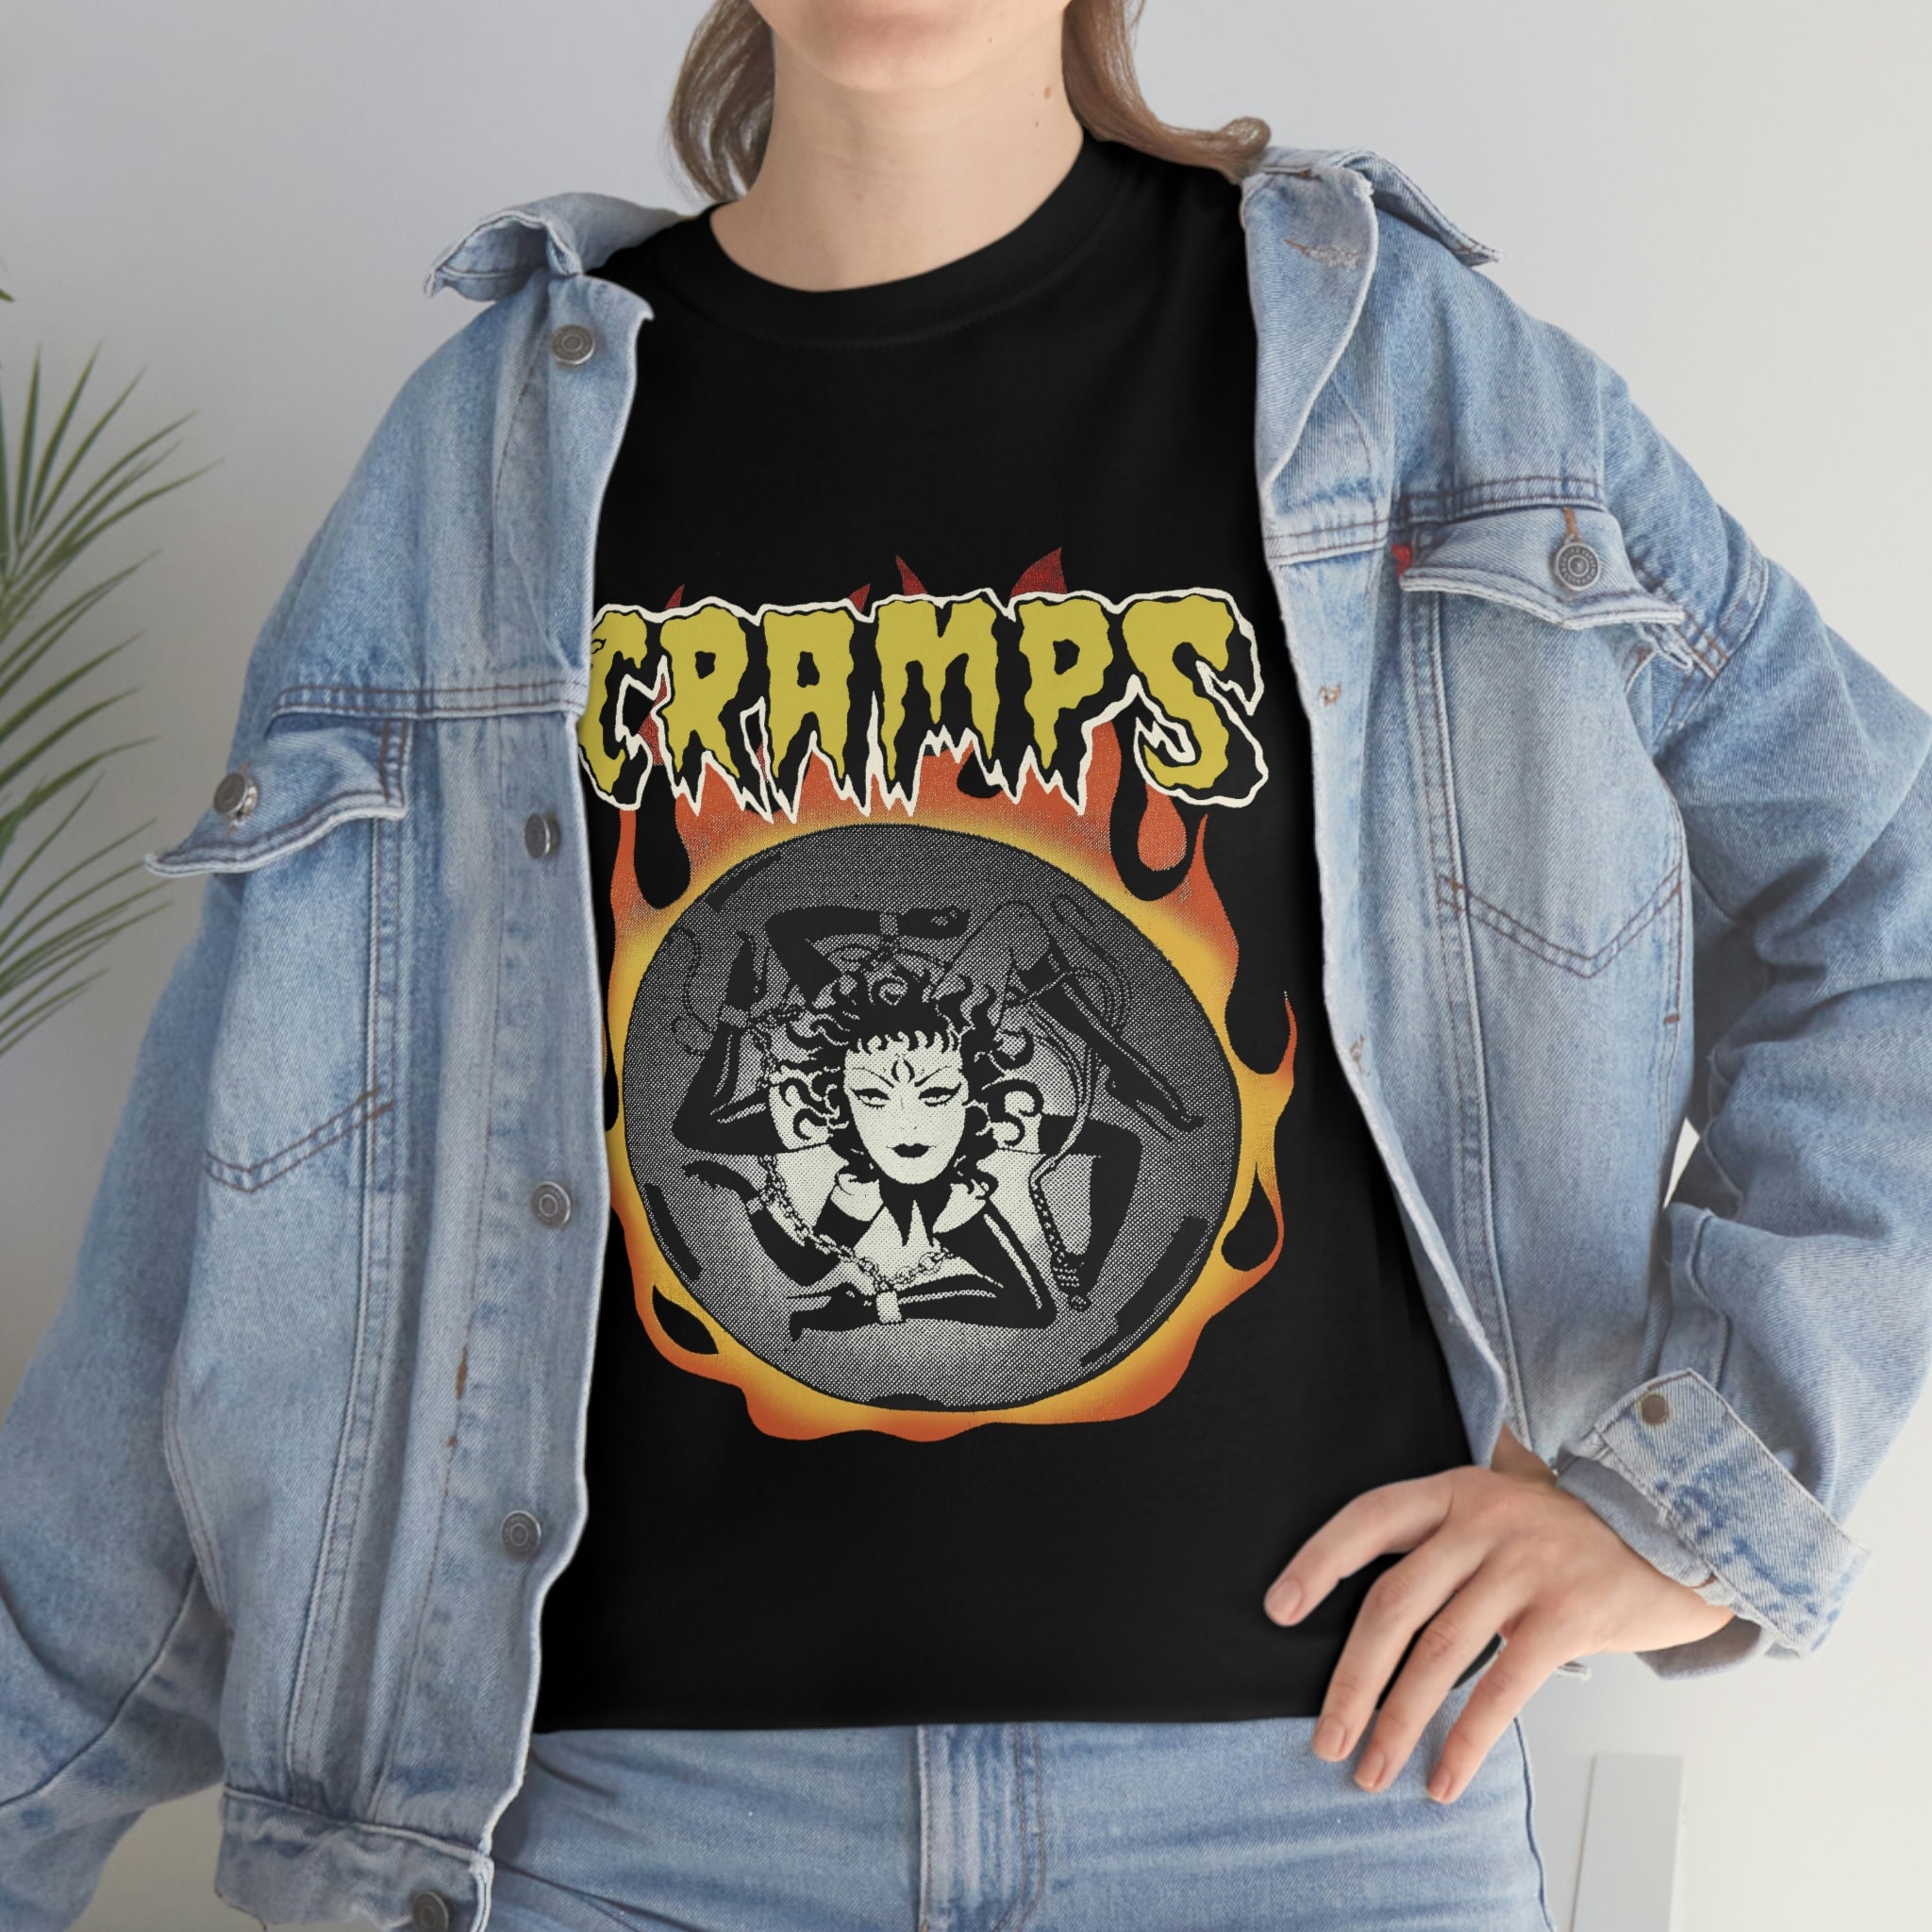 Discover Vintage The Cramps Halloween party 88 Tee ,Vintage 1980s The Cramps Tees